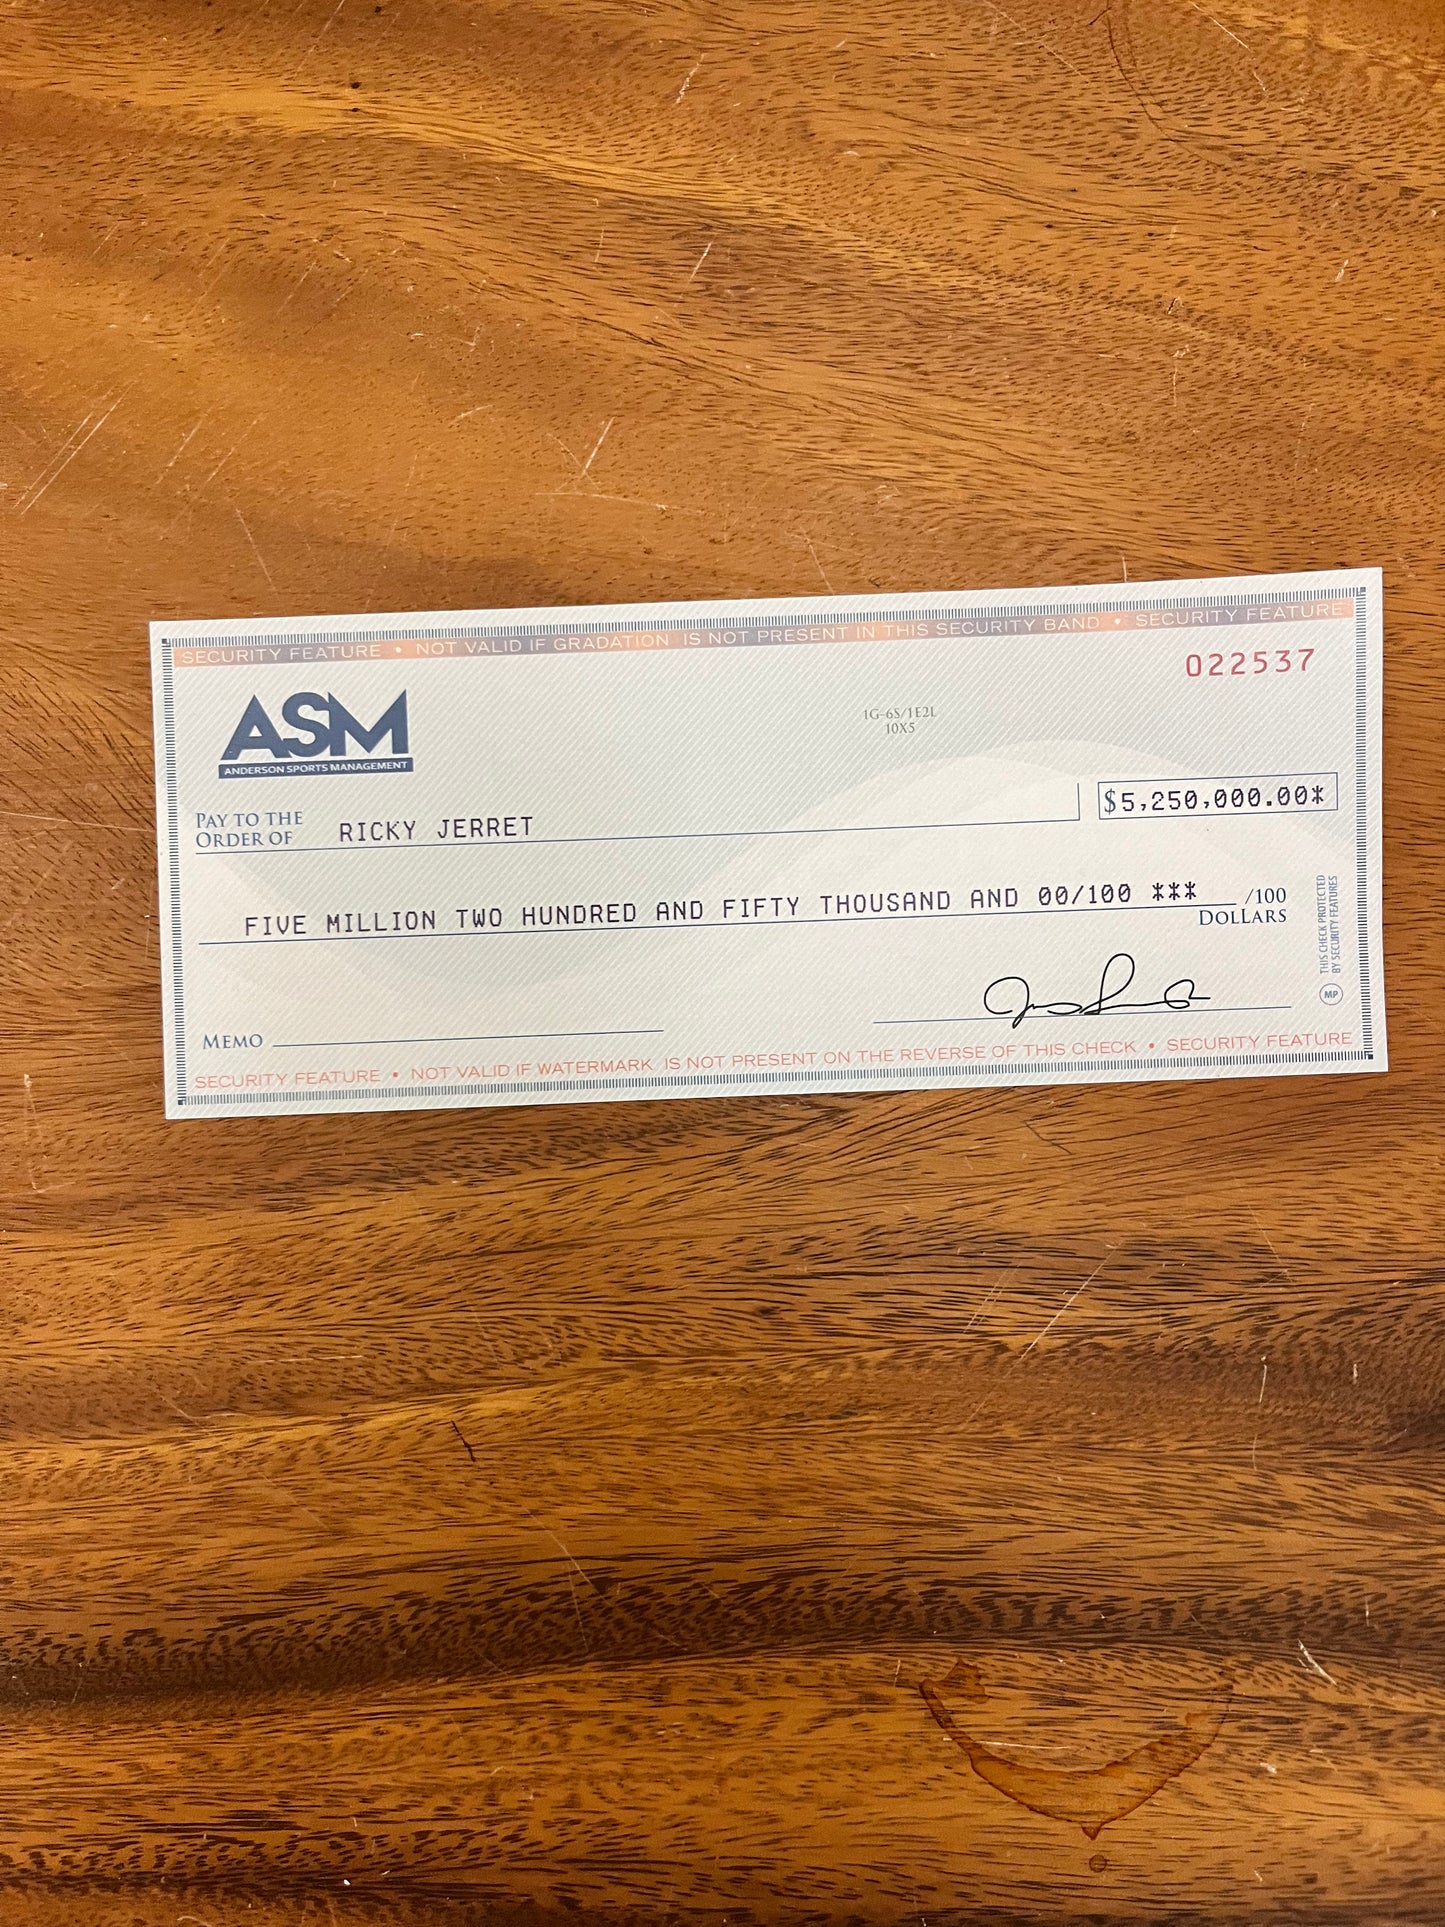 BALLERS: Ricky's ASM $5,000,000 Check